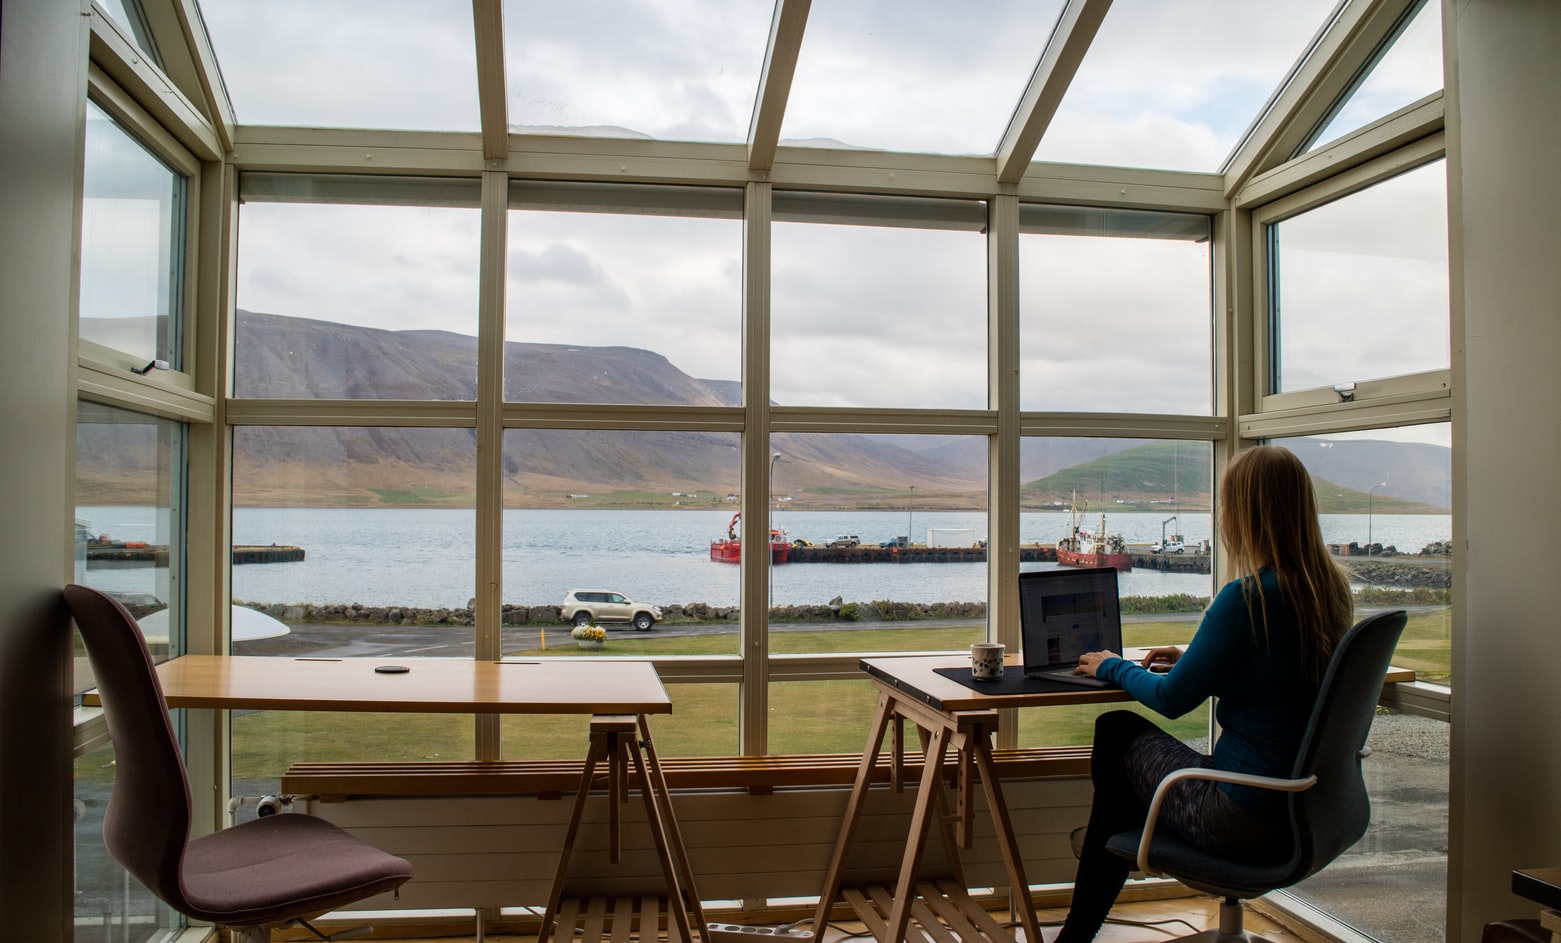 The Benefits of Remote Work and Why Employees Love It